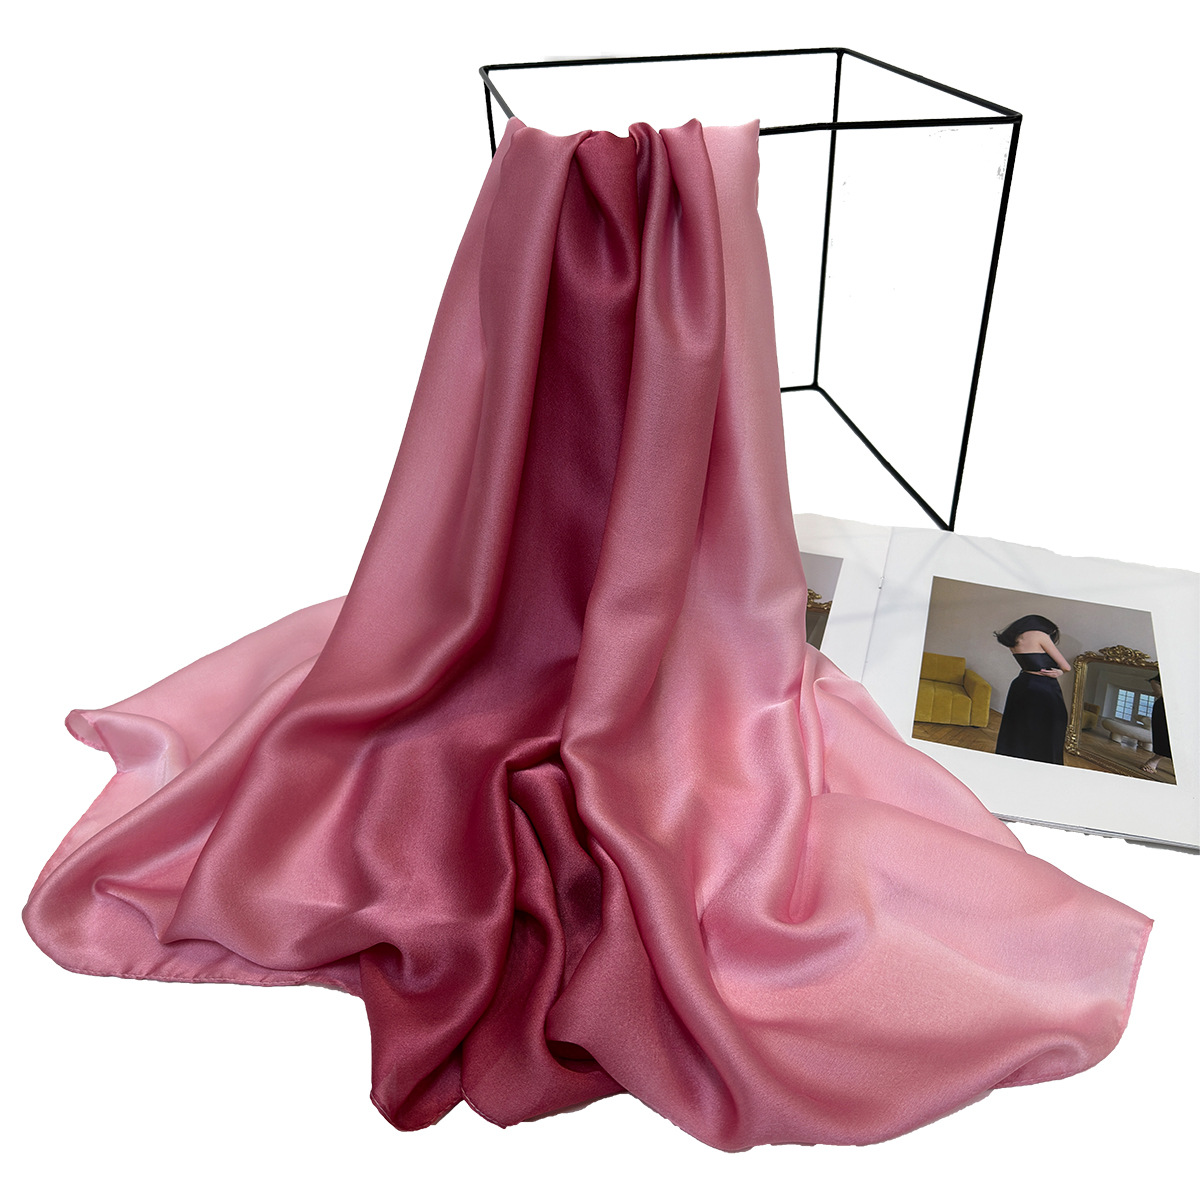 New European and American Export Advanced Fashion All-Match Silk-like Satin Gradient Color Scarf Shawl Factory Wholesale